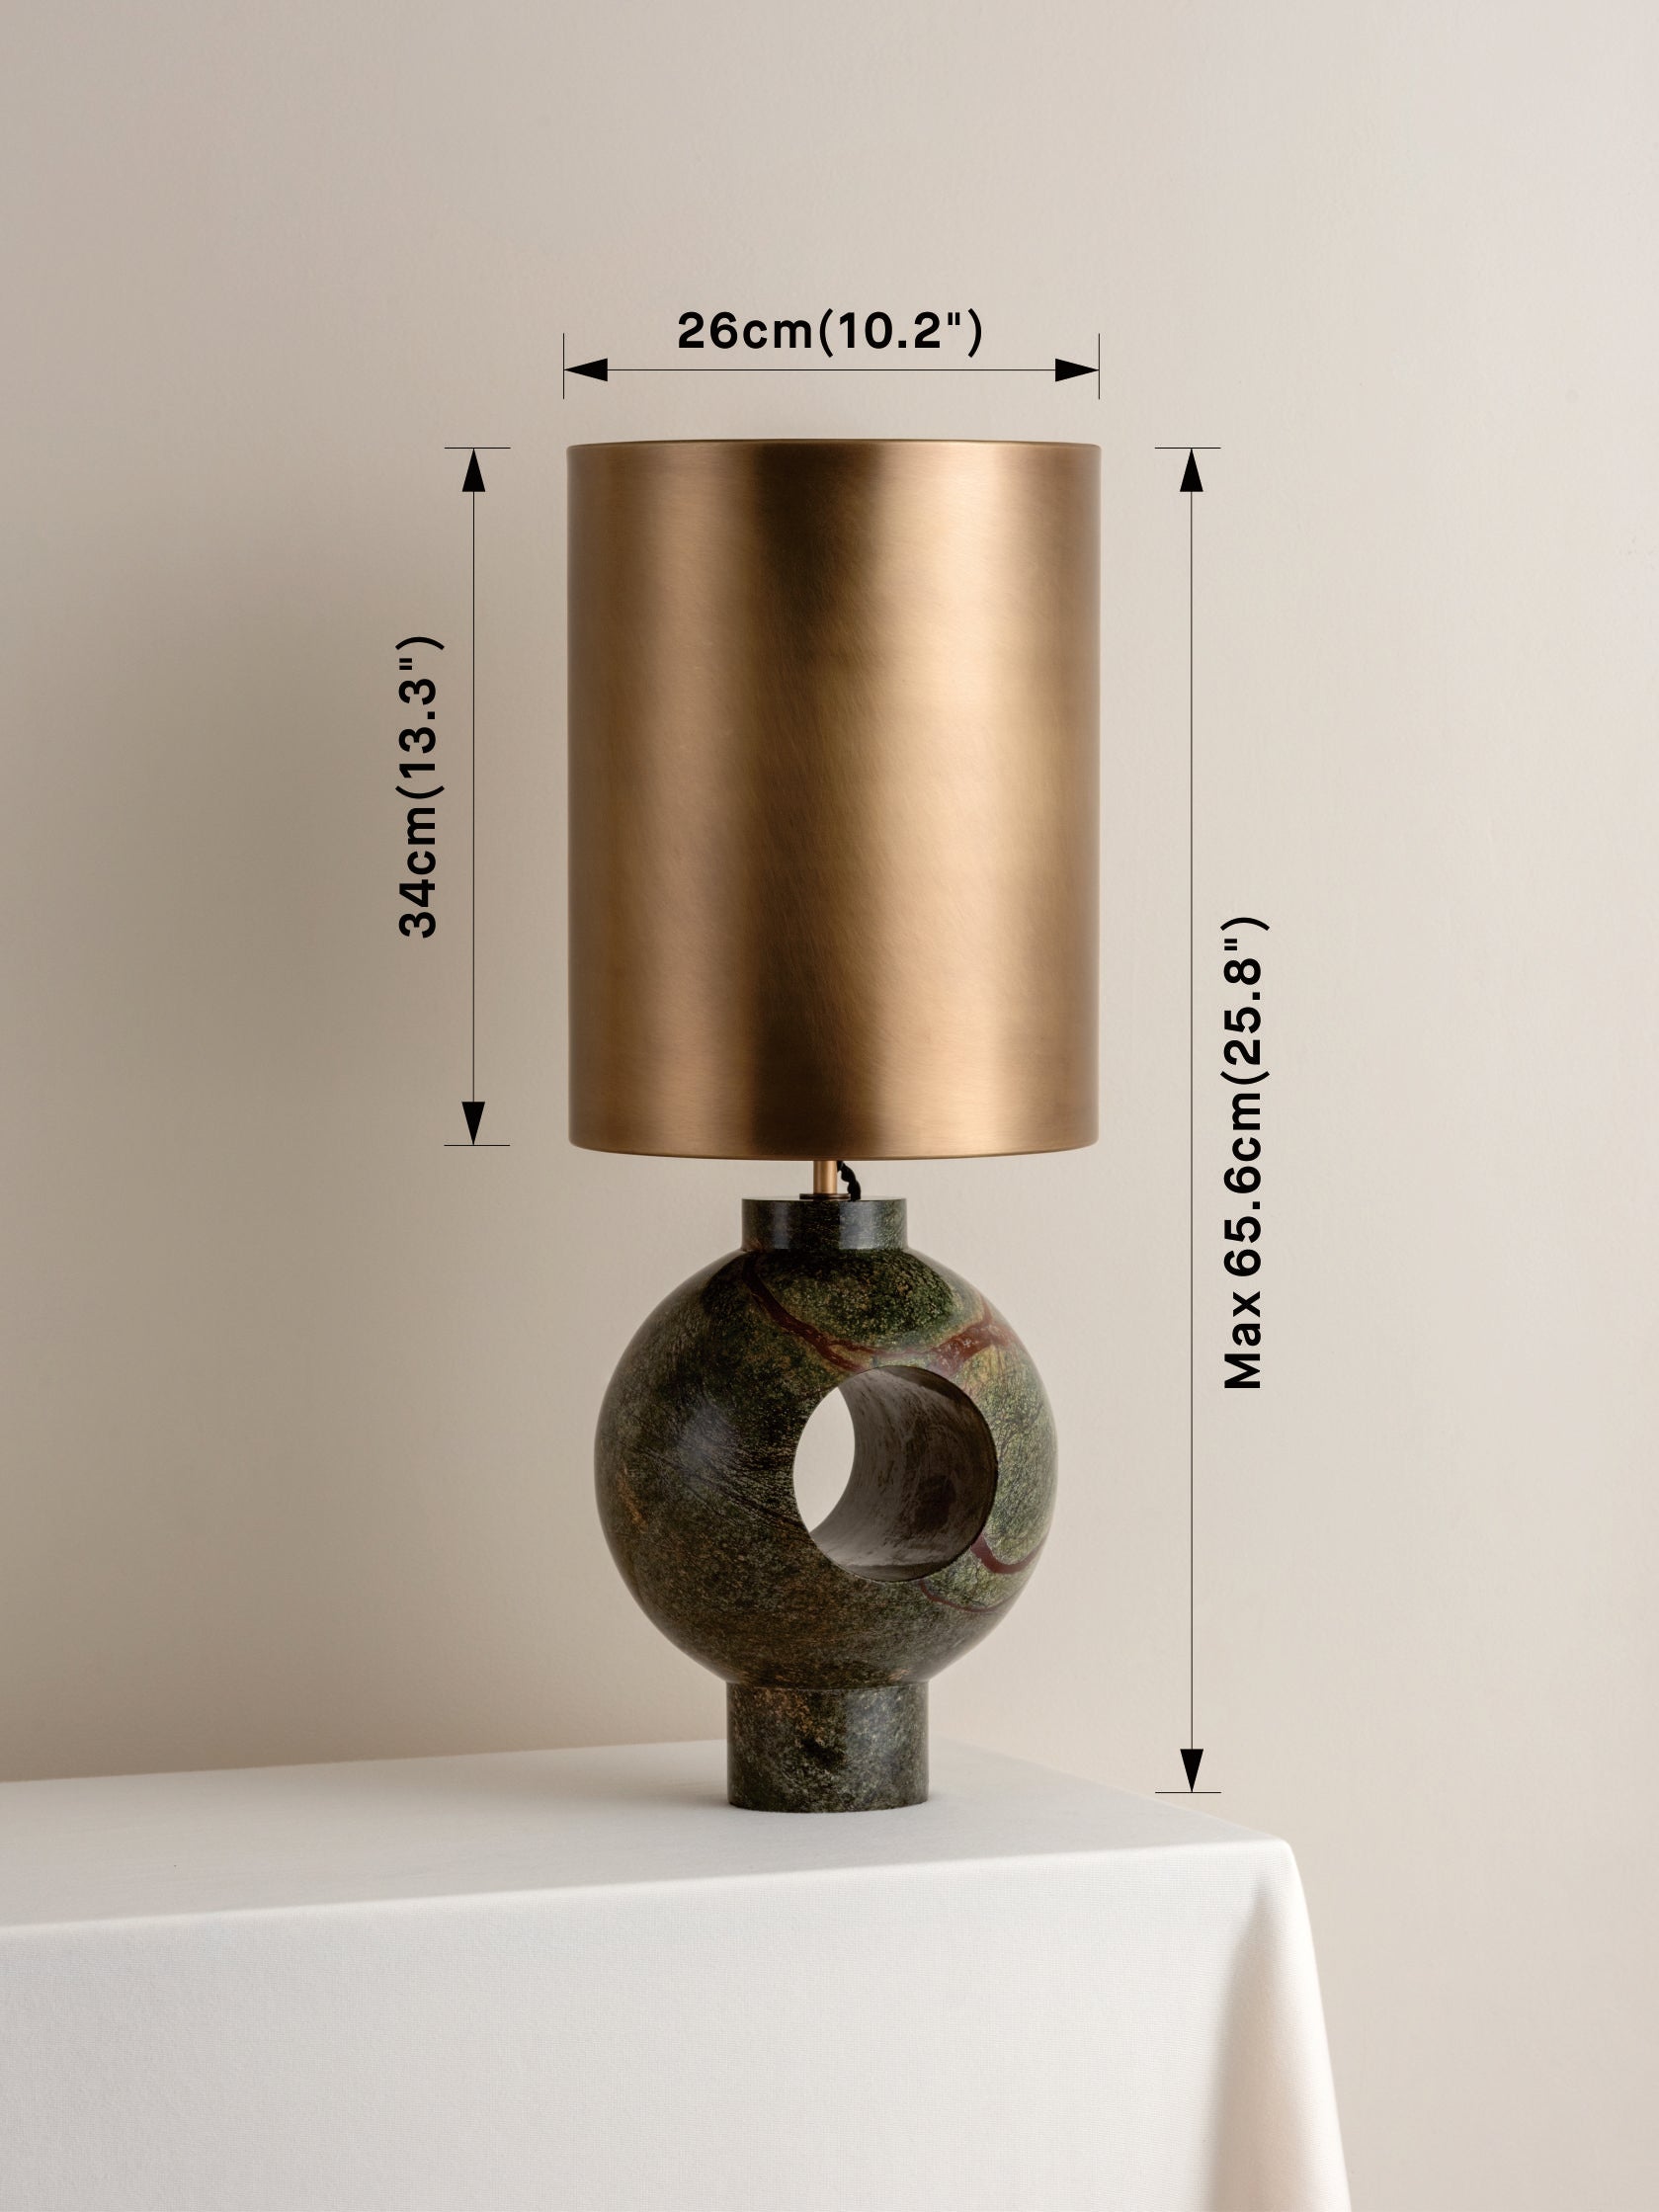 Editions marble lamp with + aged brass shade | Table Lamp | Lights & Lamps | UK | Modern Affordable Designer Lighting